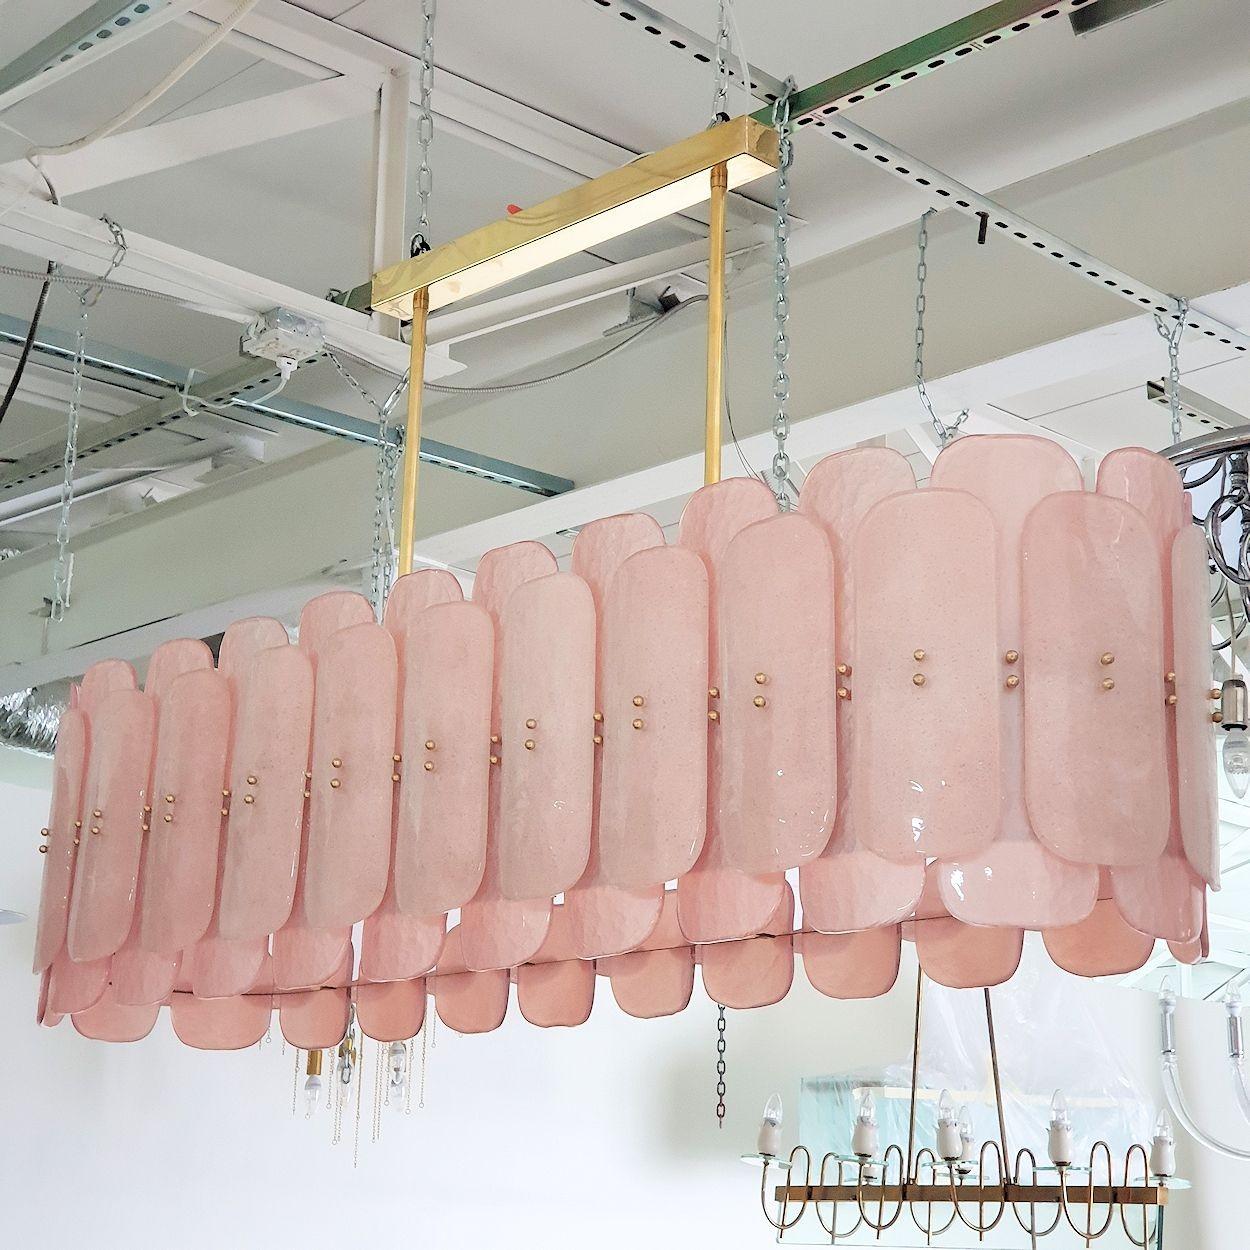 Very large elongated Murano glass chandelier, Mid Century Modern, Italy circa 1980s.
The Mid Century Modern chandelier is made of pastel pink translucent Murano glass and brass mounts.
The transitional style chandelier has 16 lights, 8 up, 8 down.